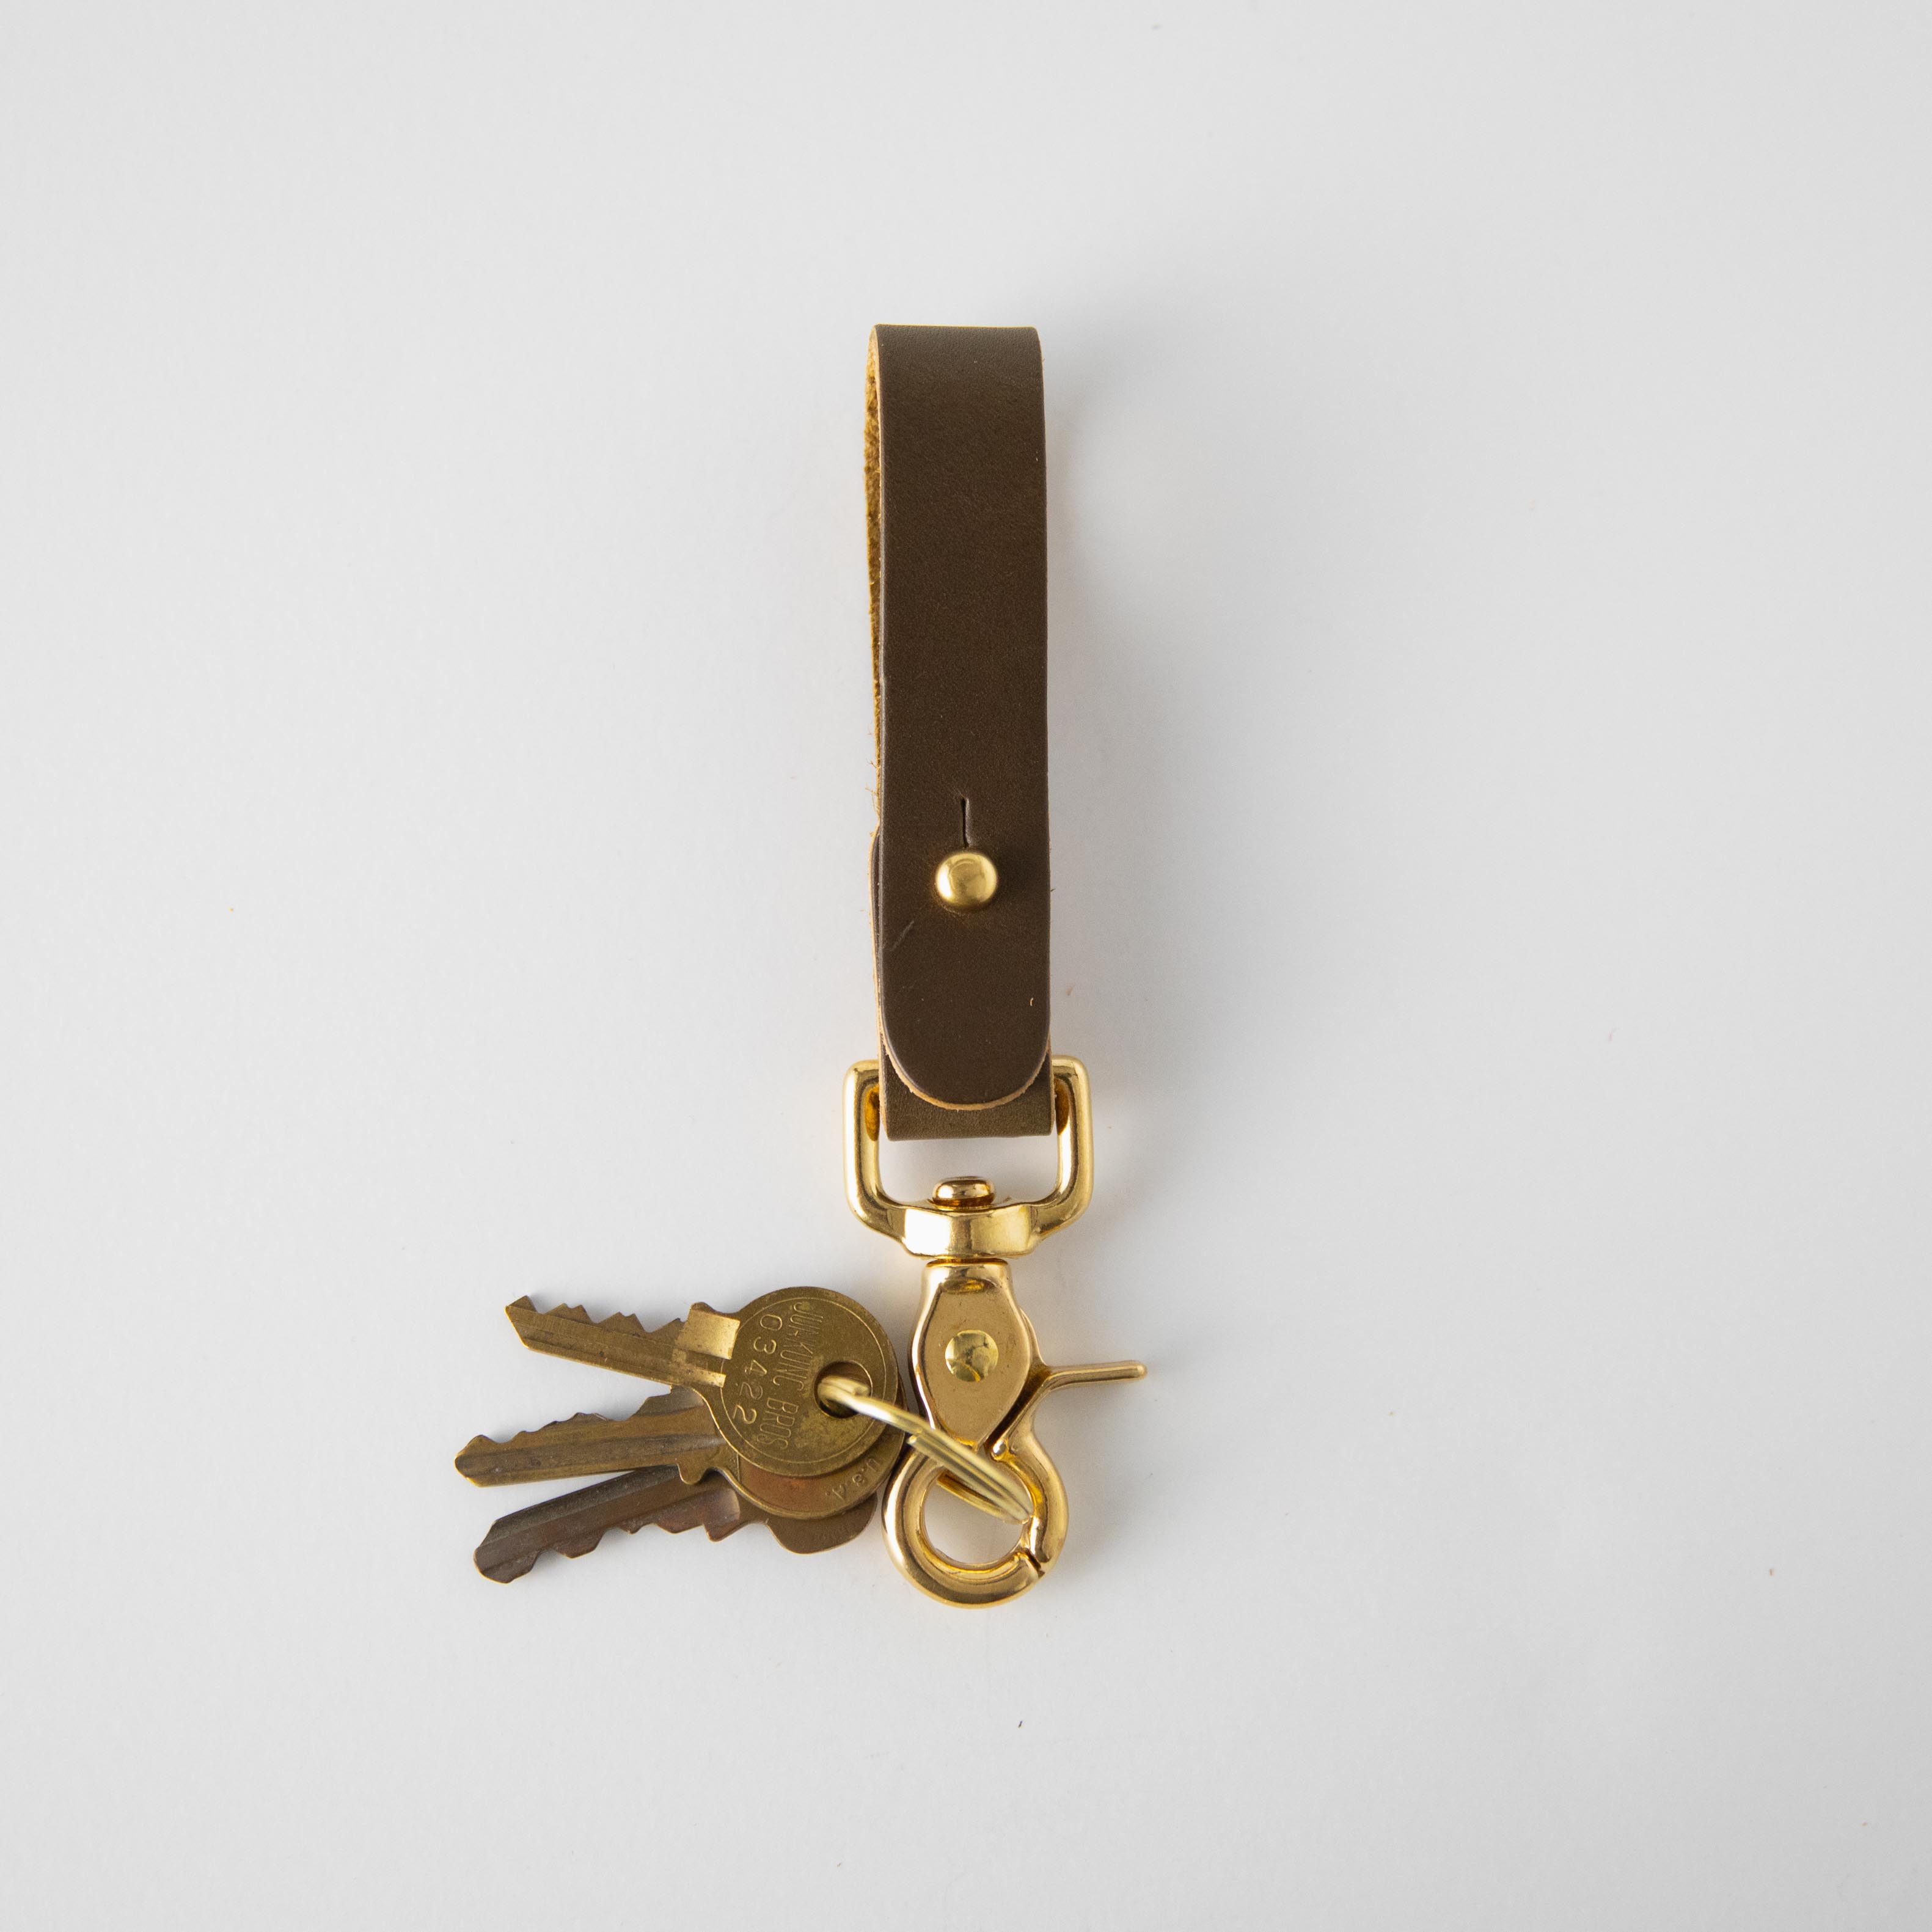 Madewell The Front Door Key Fob in Leather - Size One S